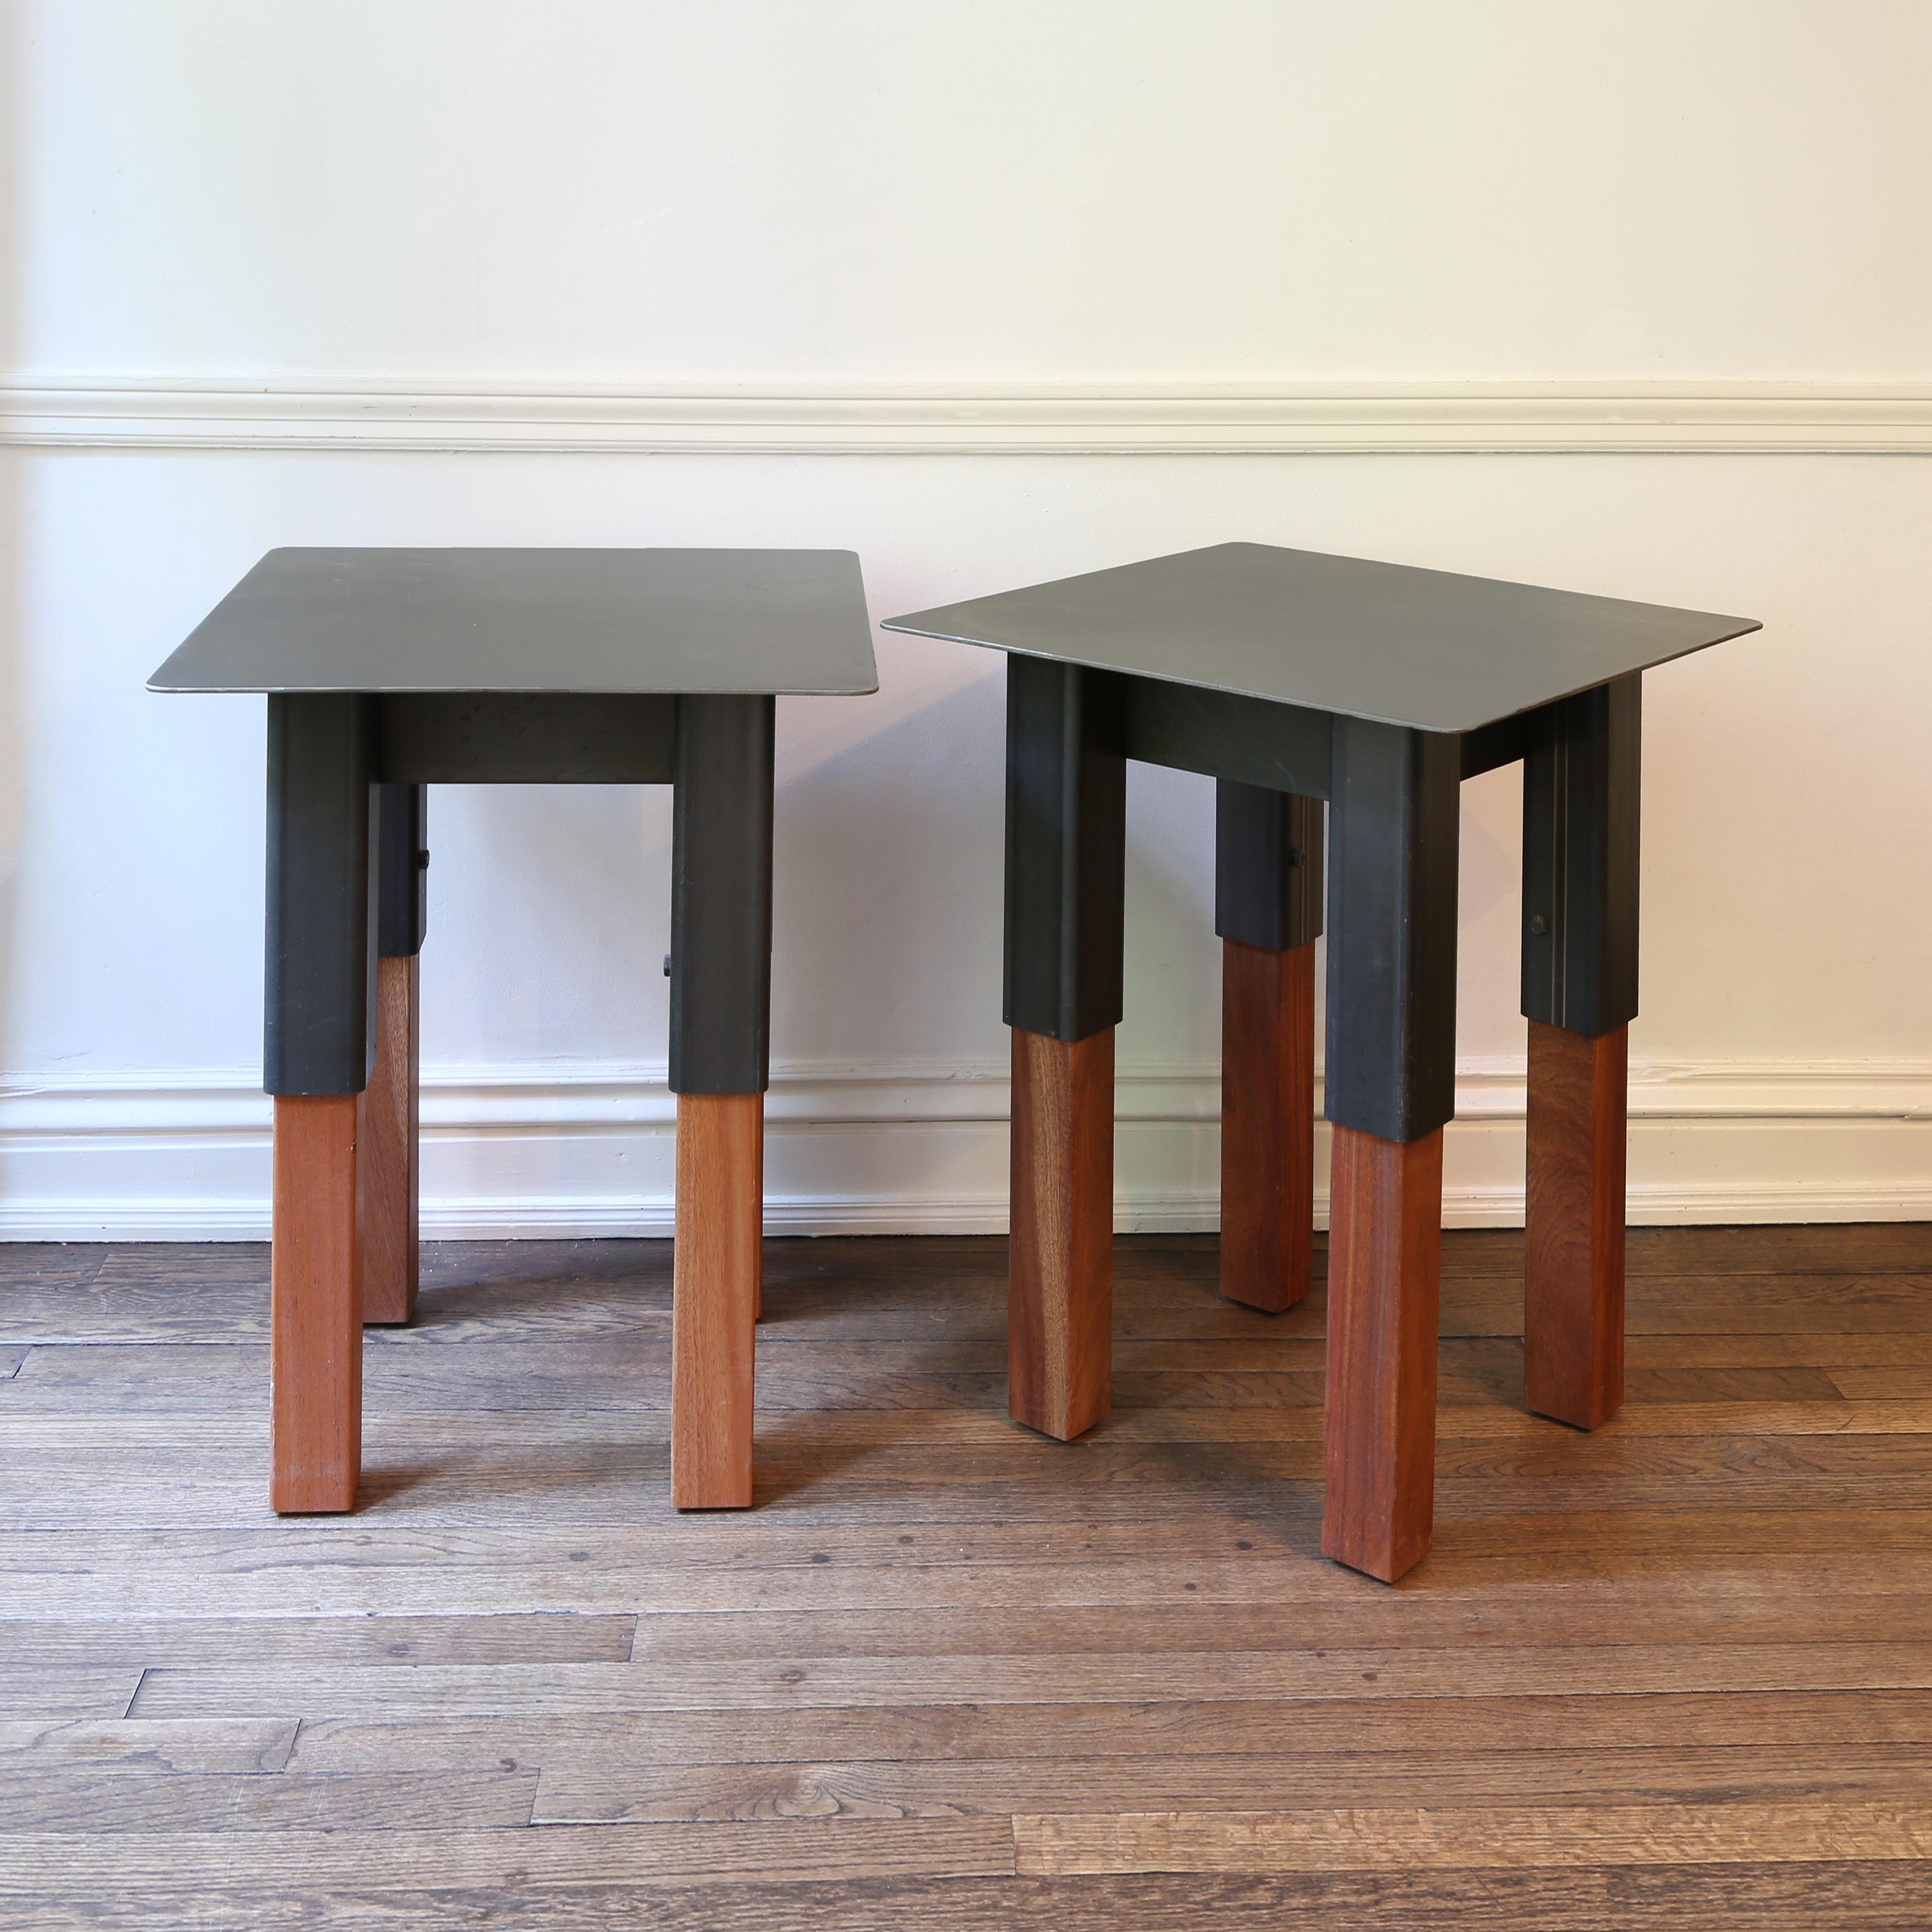 Bodhi Surfer Side Tables / End Tables Steel and Mahogany, Jordan Mozer, USA 2013 In Good Condition For Sale In Chicago, IL